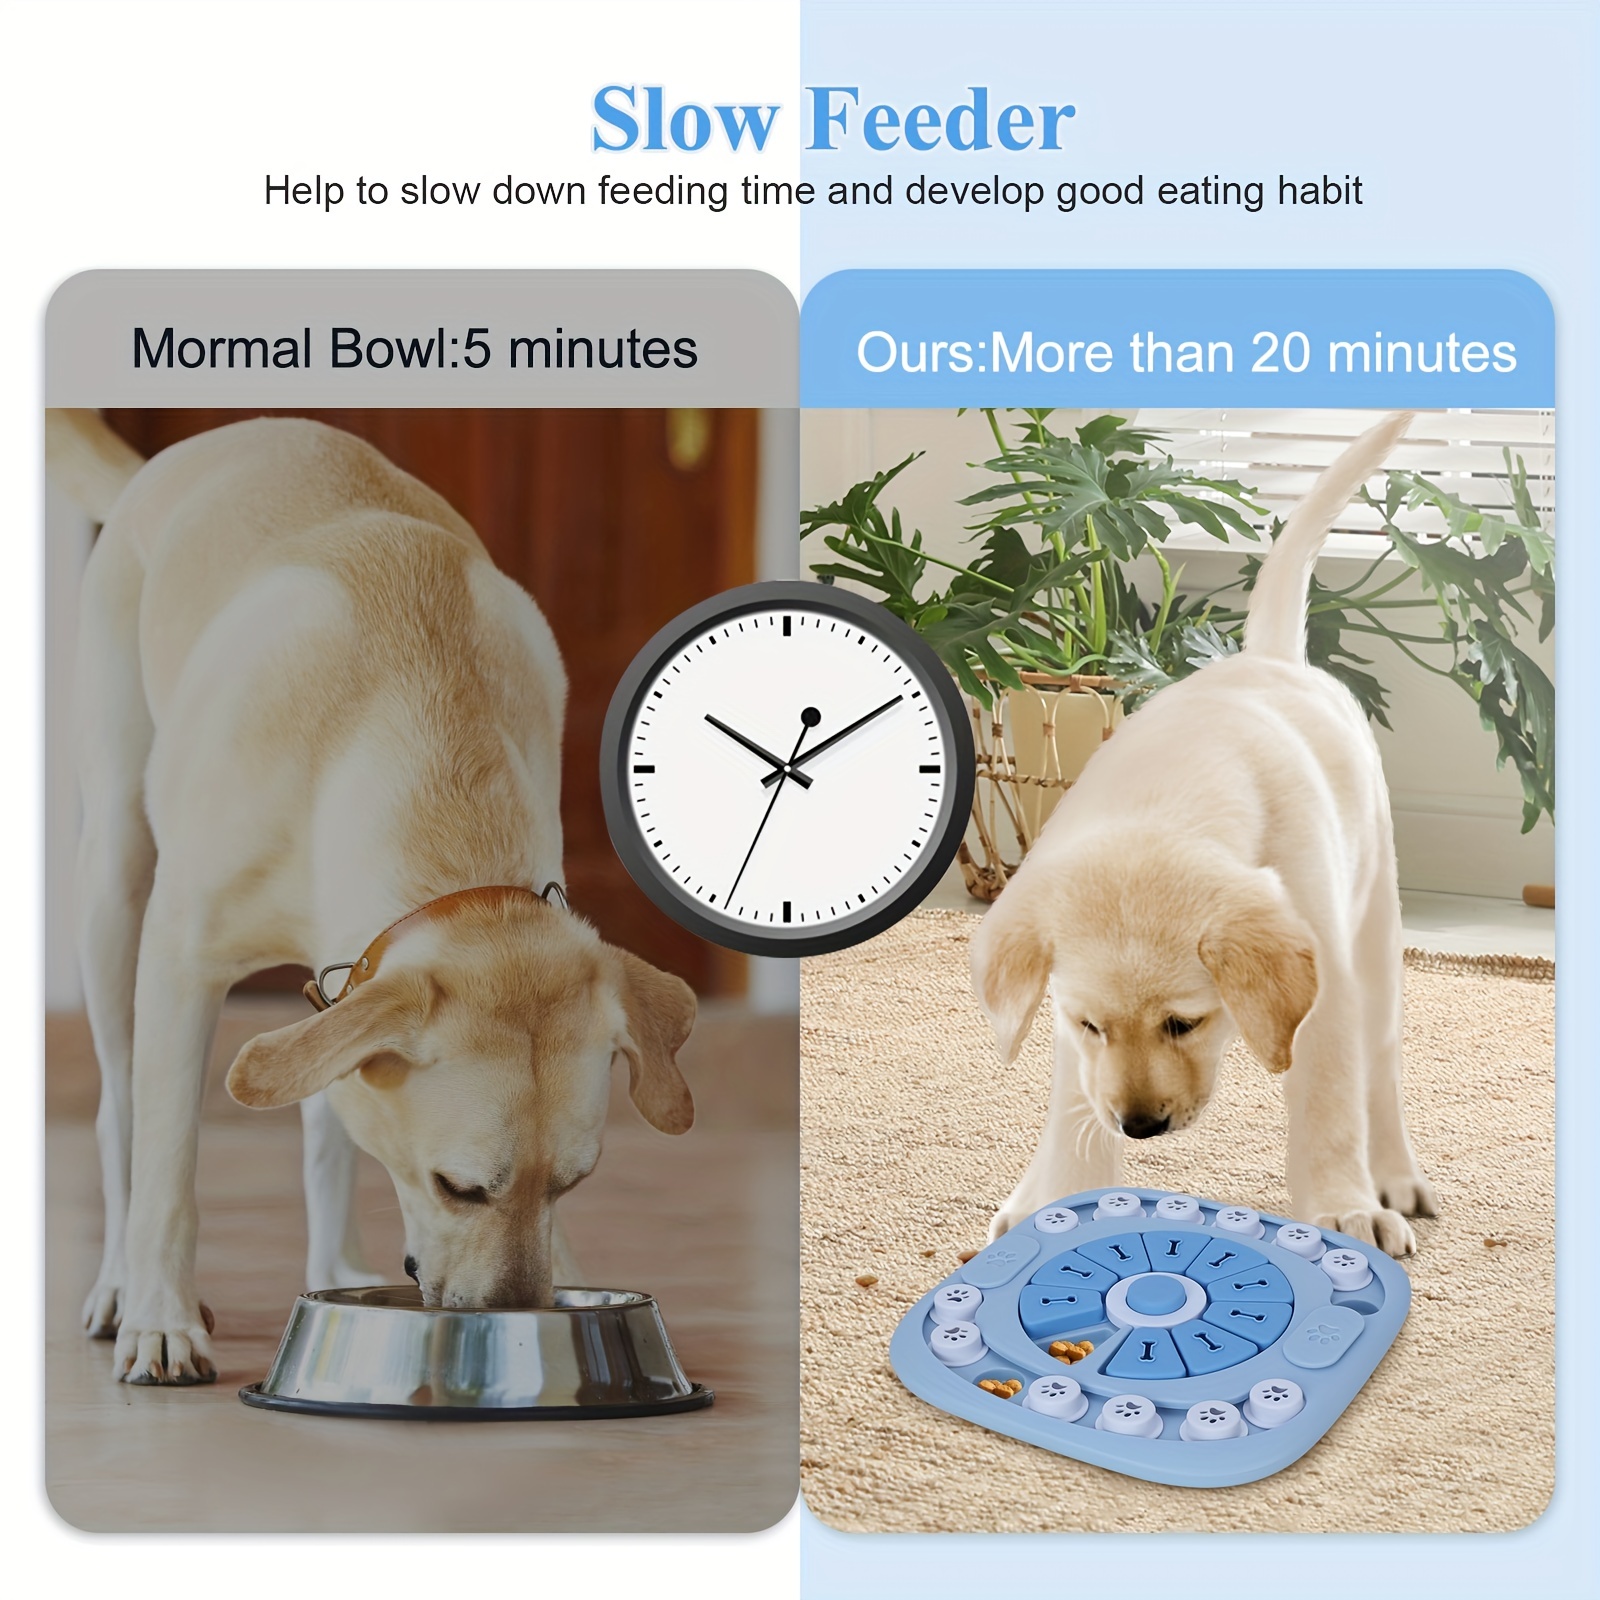 Interactive Dog Puzzle Toy With Squeaker - Slow Feeder For Small